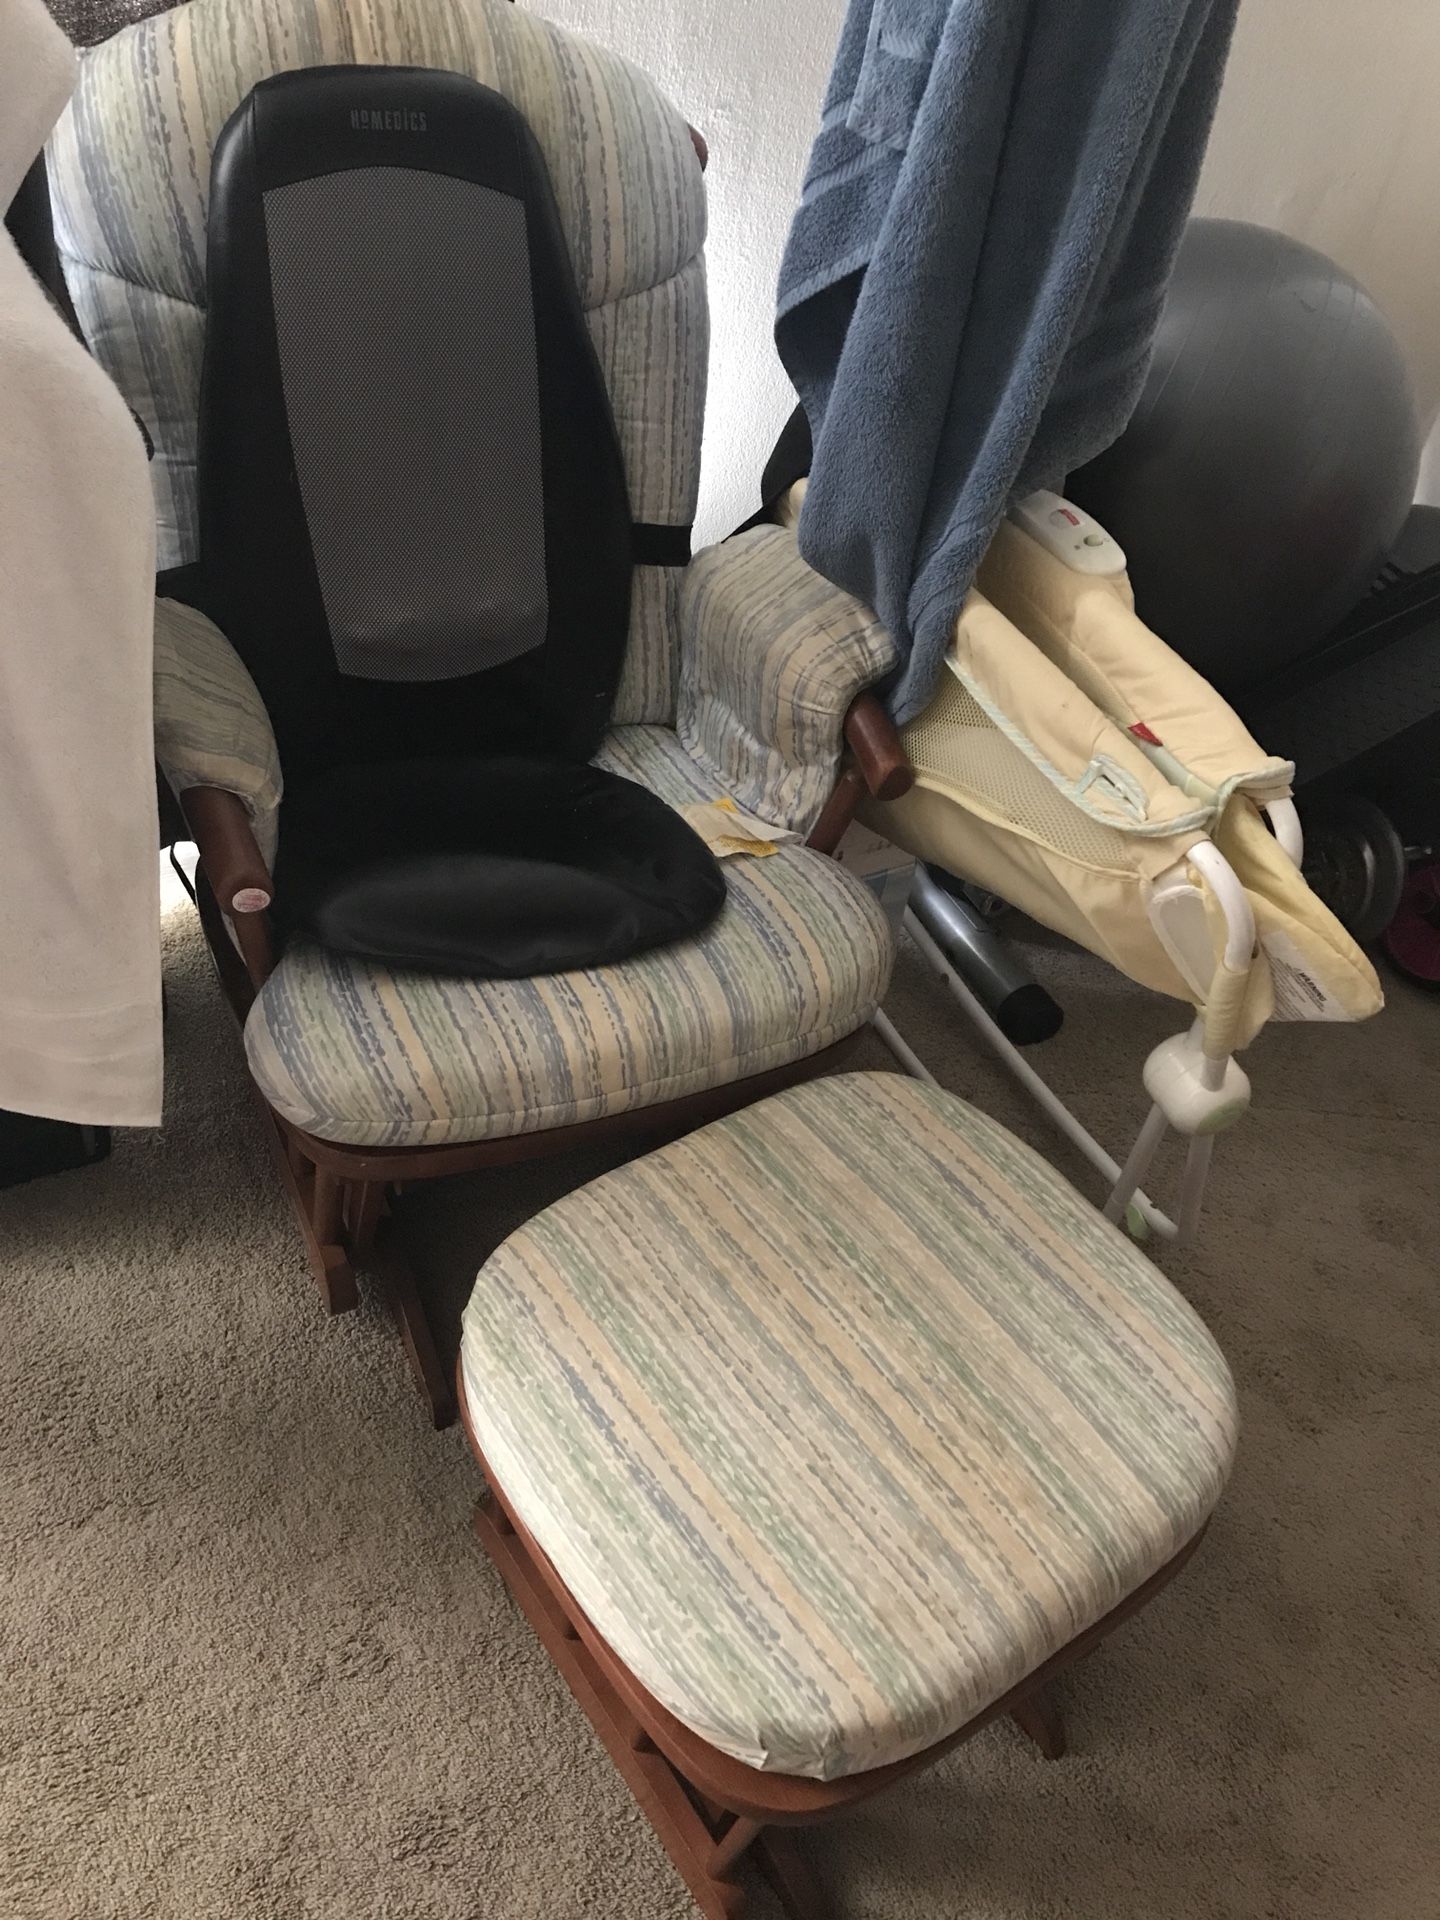 Rocking chair with foot rest